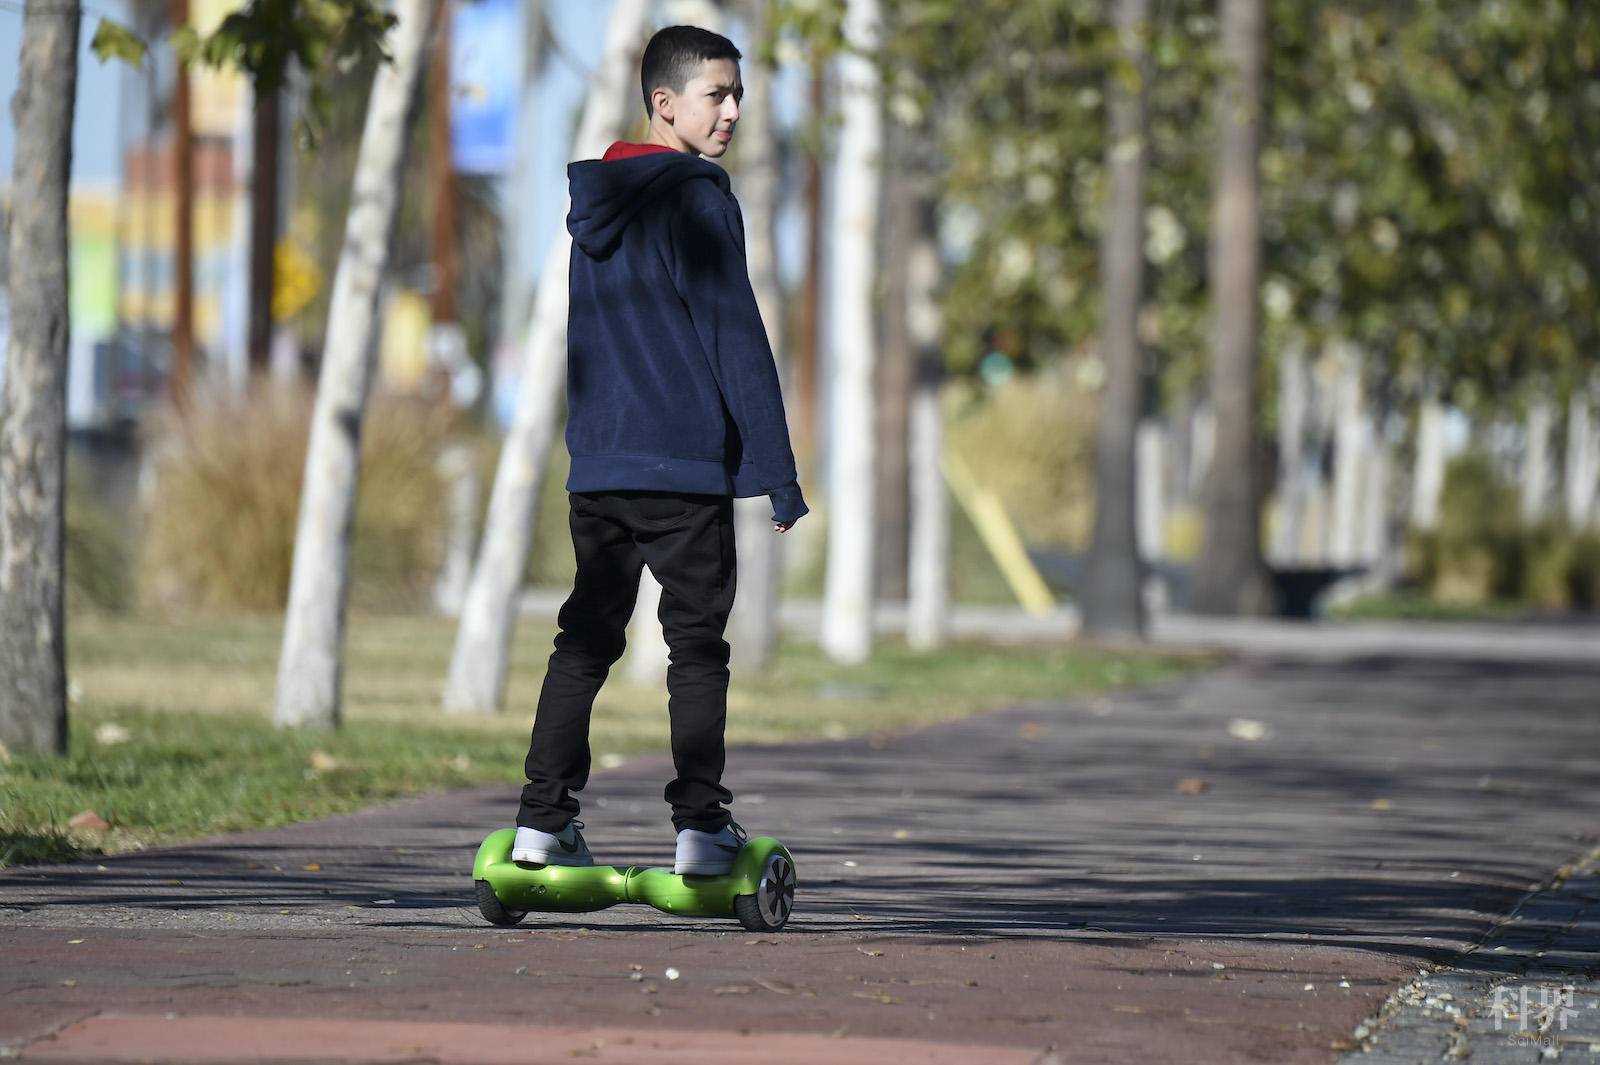 A boy rides a hoverboard on the day after Christmas, in San Pedro, California December 26, 2015. Reports of some hoverboards, also known as self-balancing, two-wheeled scooters catching fire have led to an investigation by the Consumer Product Safety Commission.AFP PHOTO / ROBYN BECK / AFP / ROBYN BECK(Photo credit should read ROBYN BECK/AFP via Getty Images)